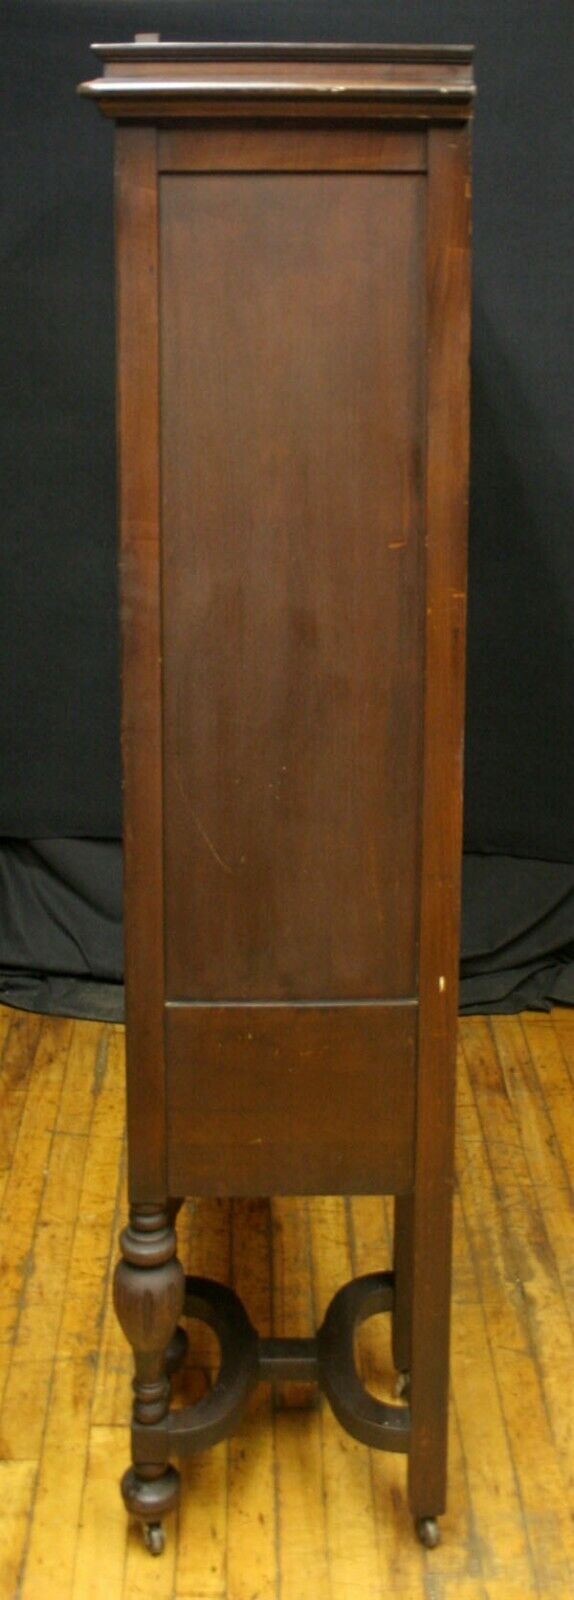 Antique Vintage Old Reclaimed Salvaged Wood Wooden Bowed Glass Curio China Cabinet Server Breakfront